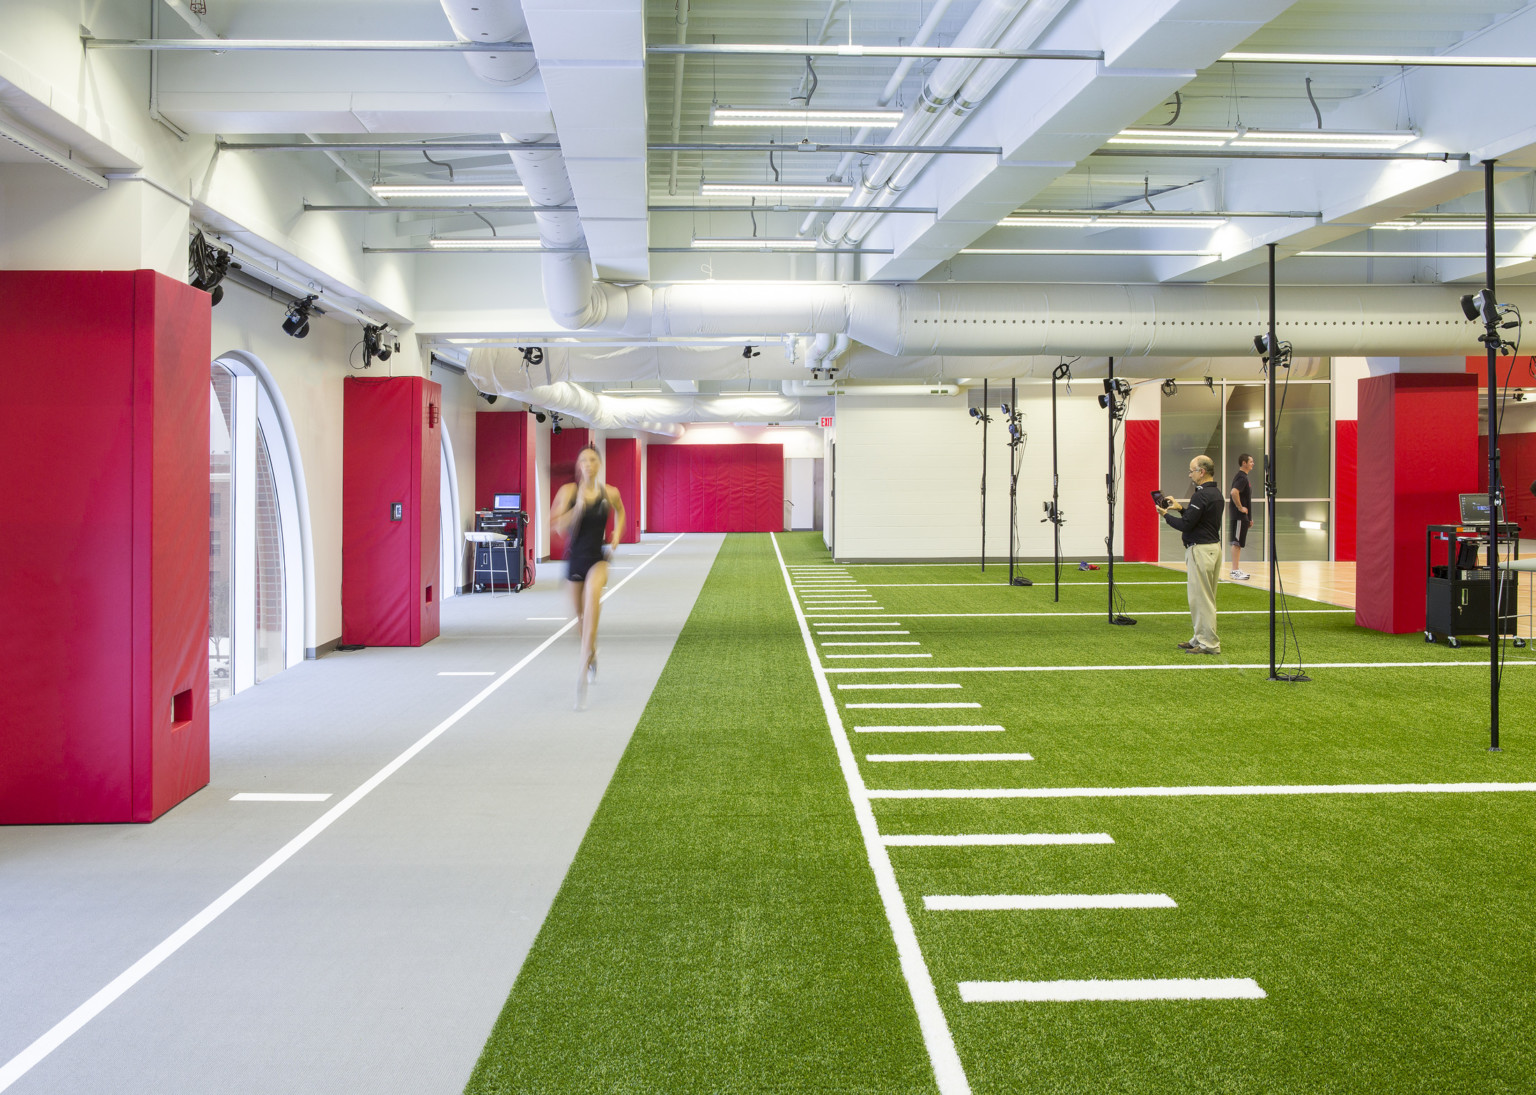 The University of Nebraska Athletic Performance Lab training facility with grey and turf floor in white room with red padding